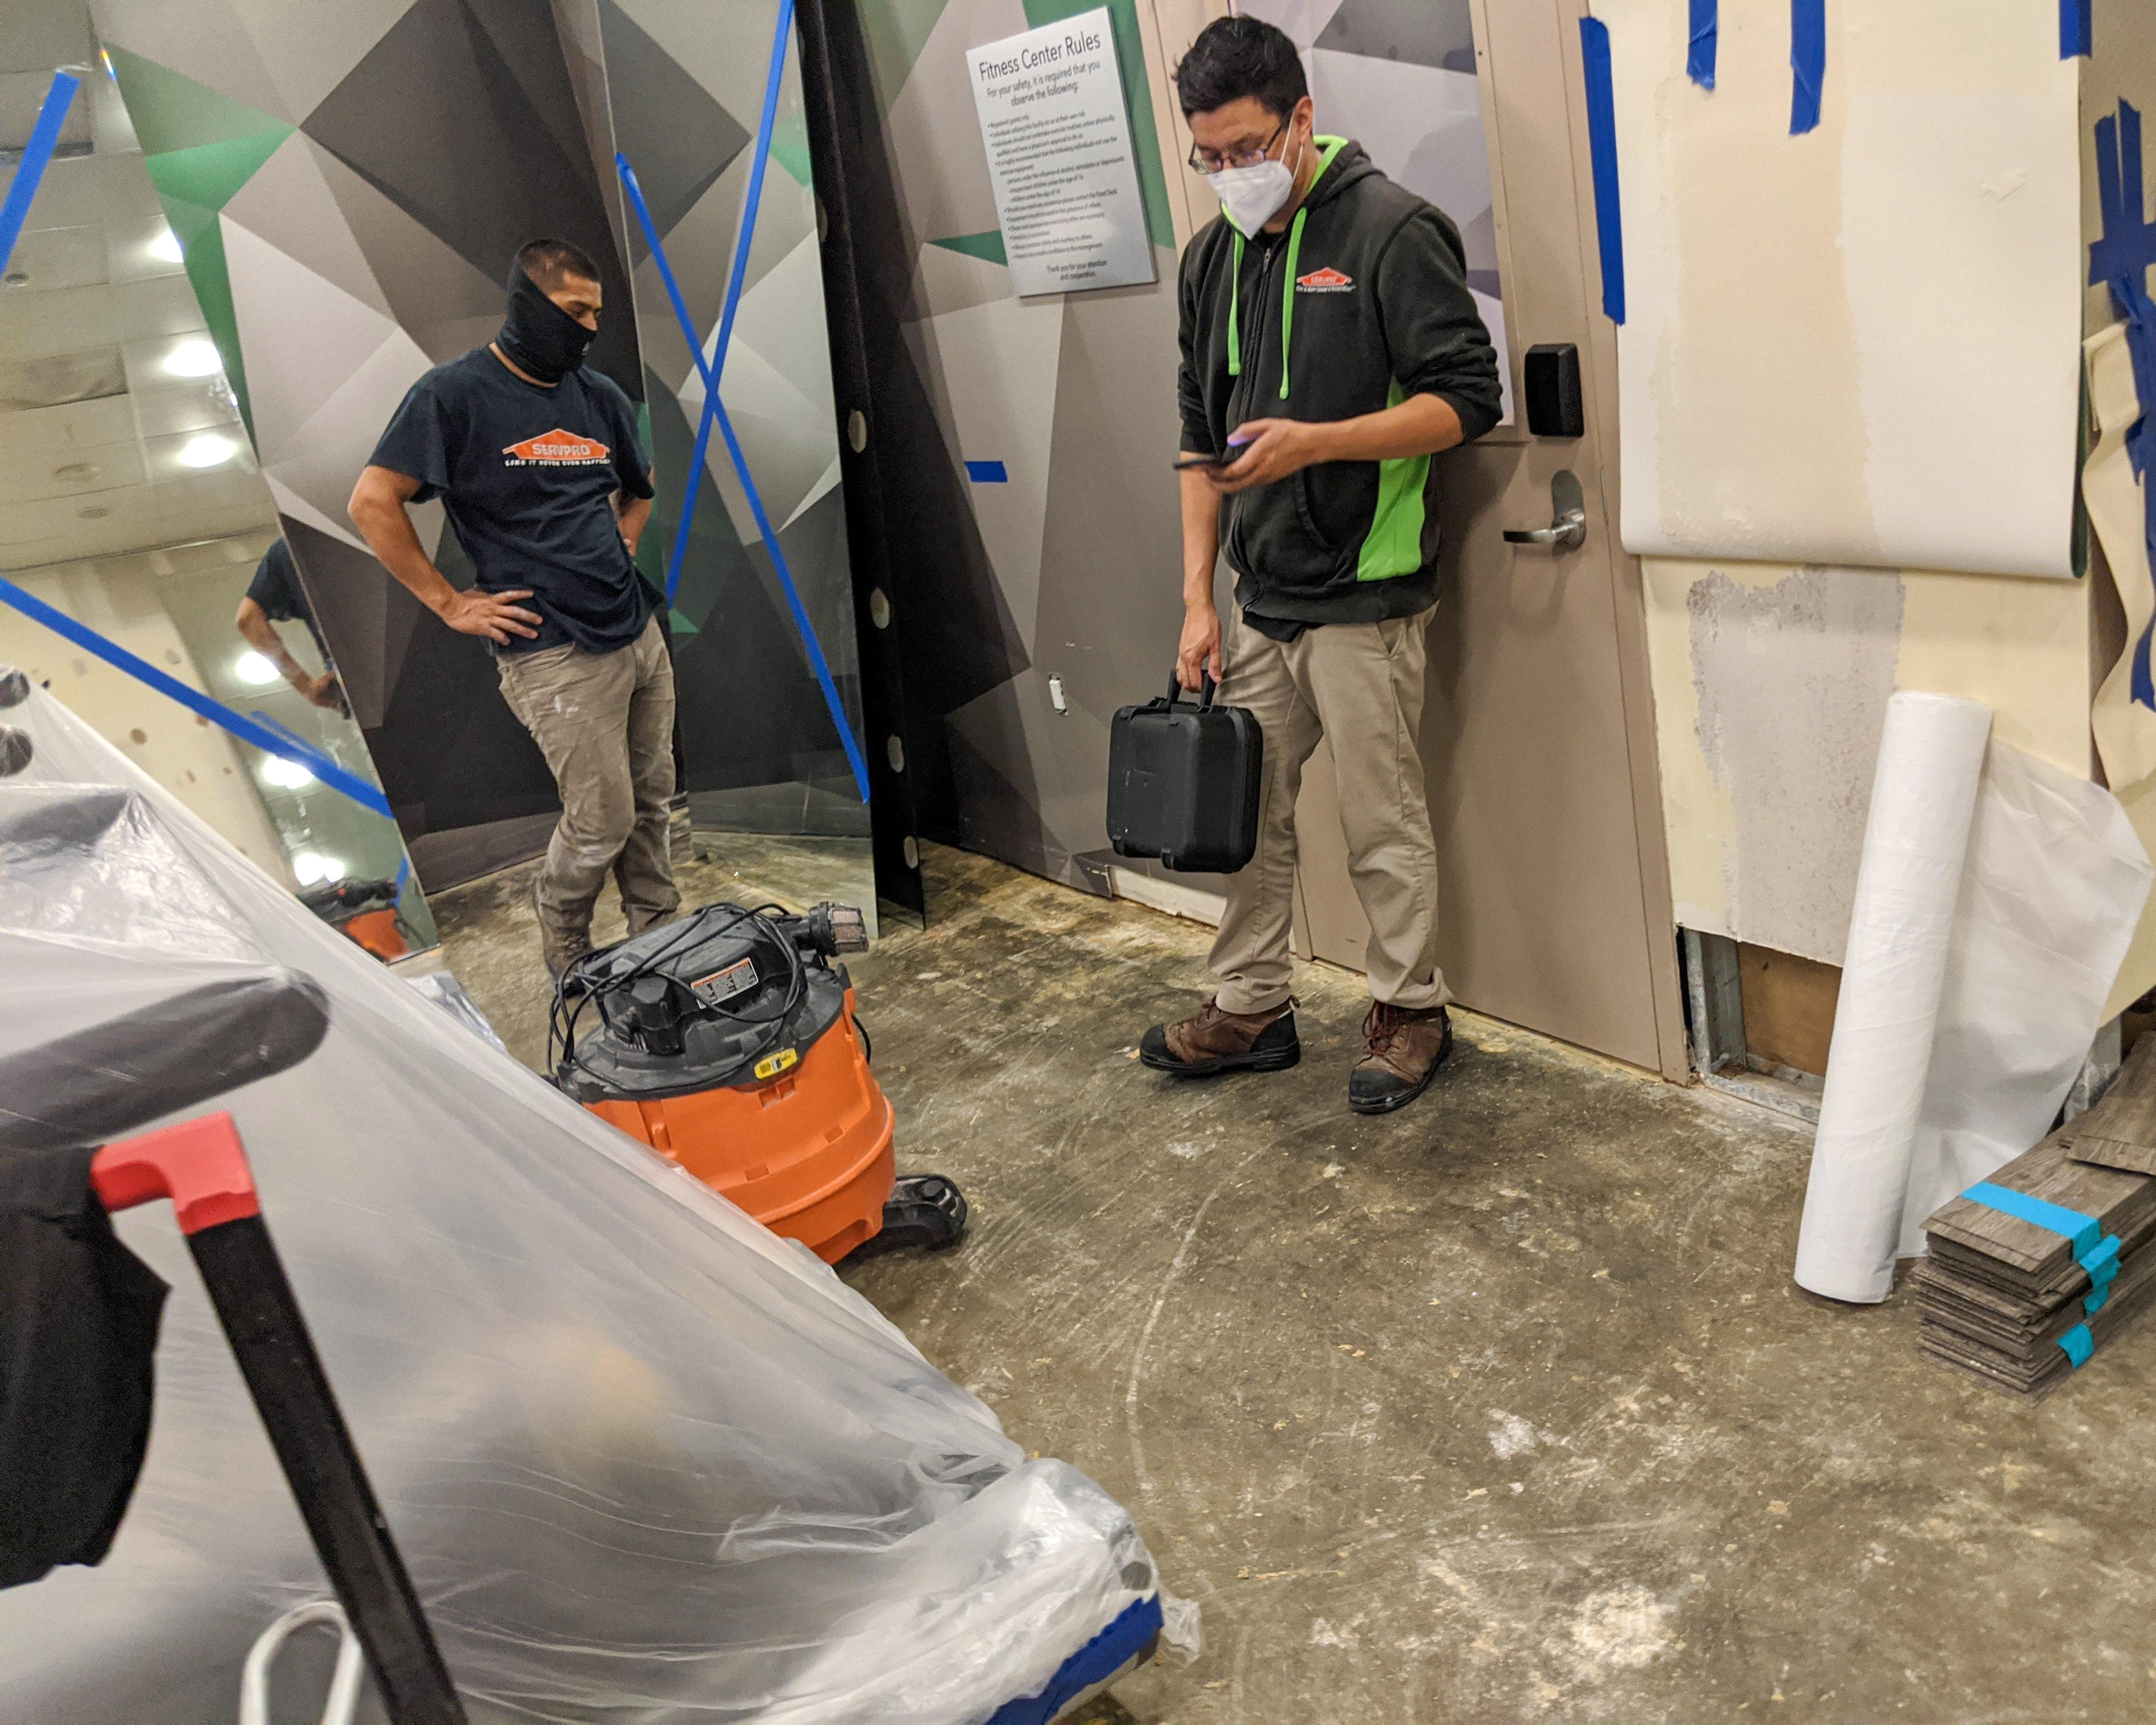 If you need major water extraction or your property has severe water damage, you need to call the experts at SERVPRO of Centre City / Uptown.